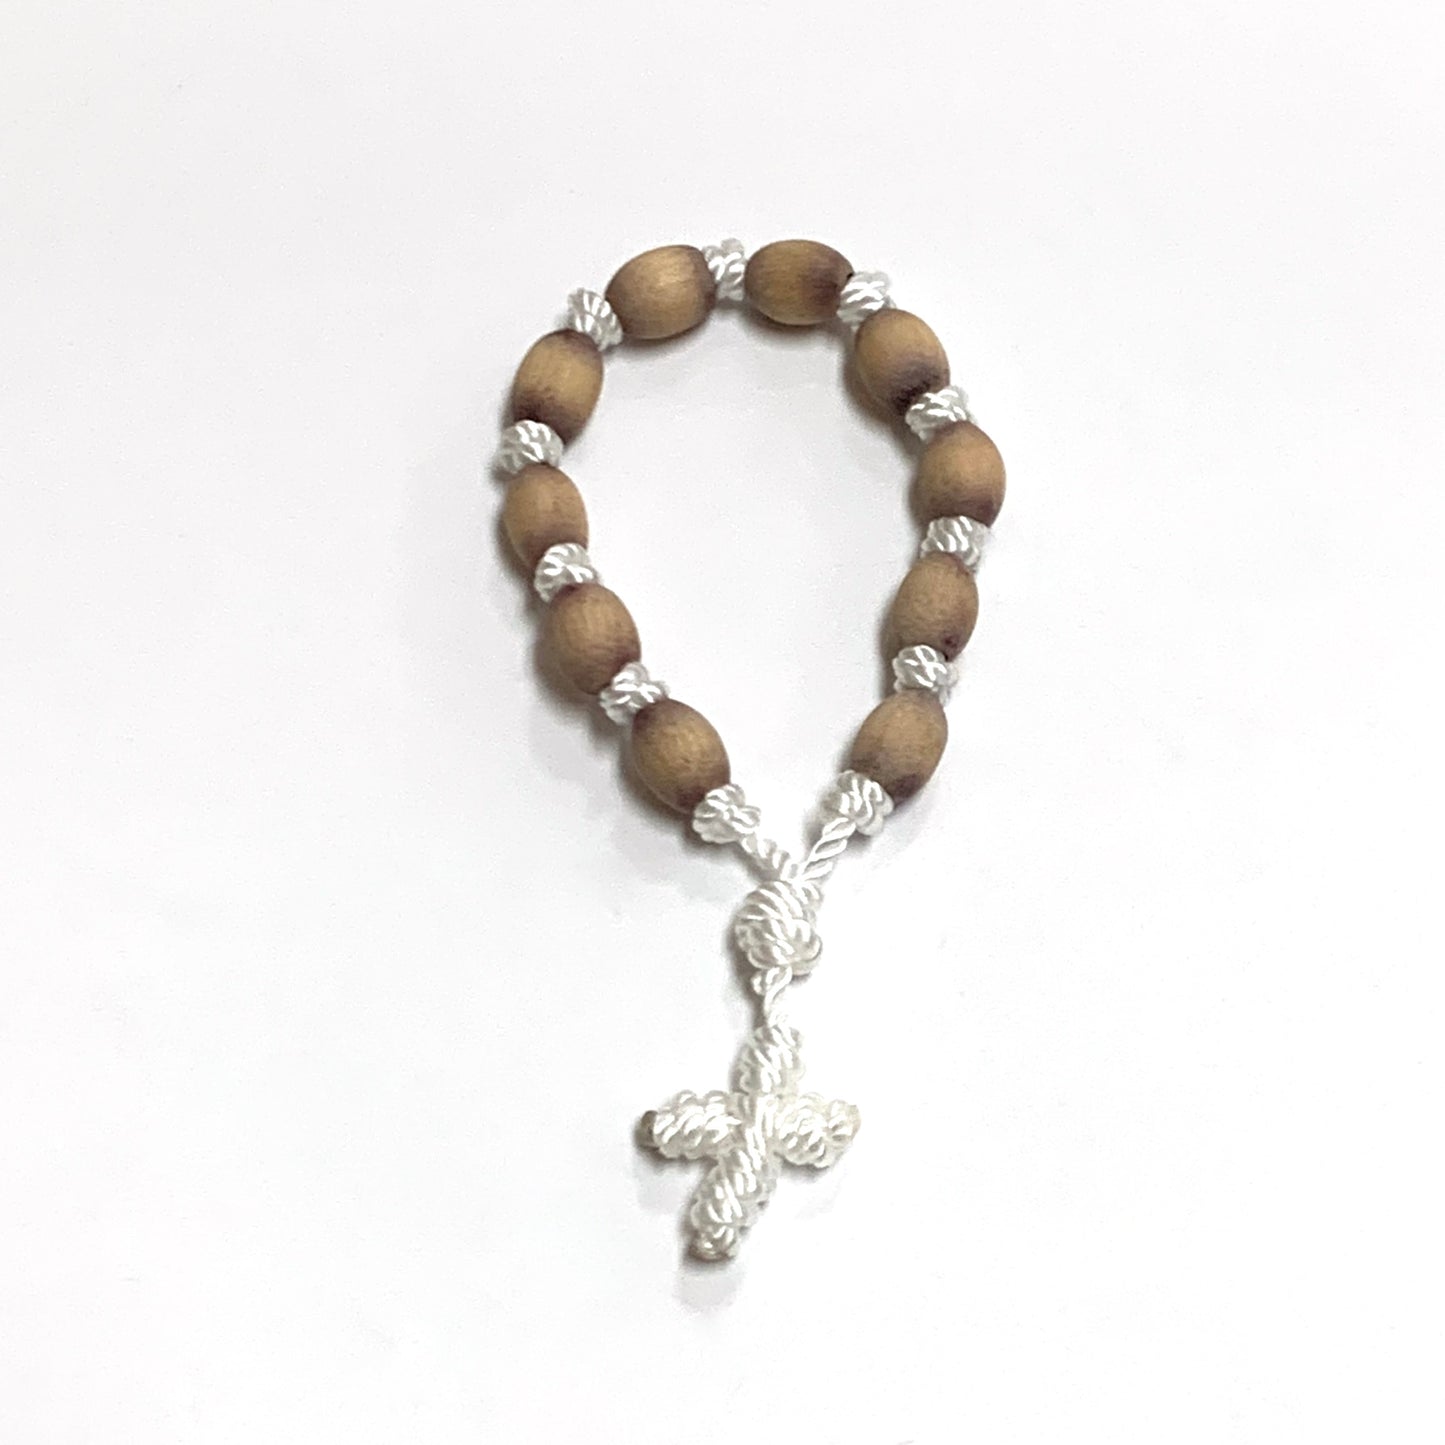 Hand-Made Wooden Decade Rosary